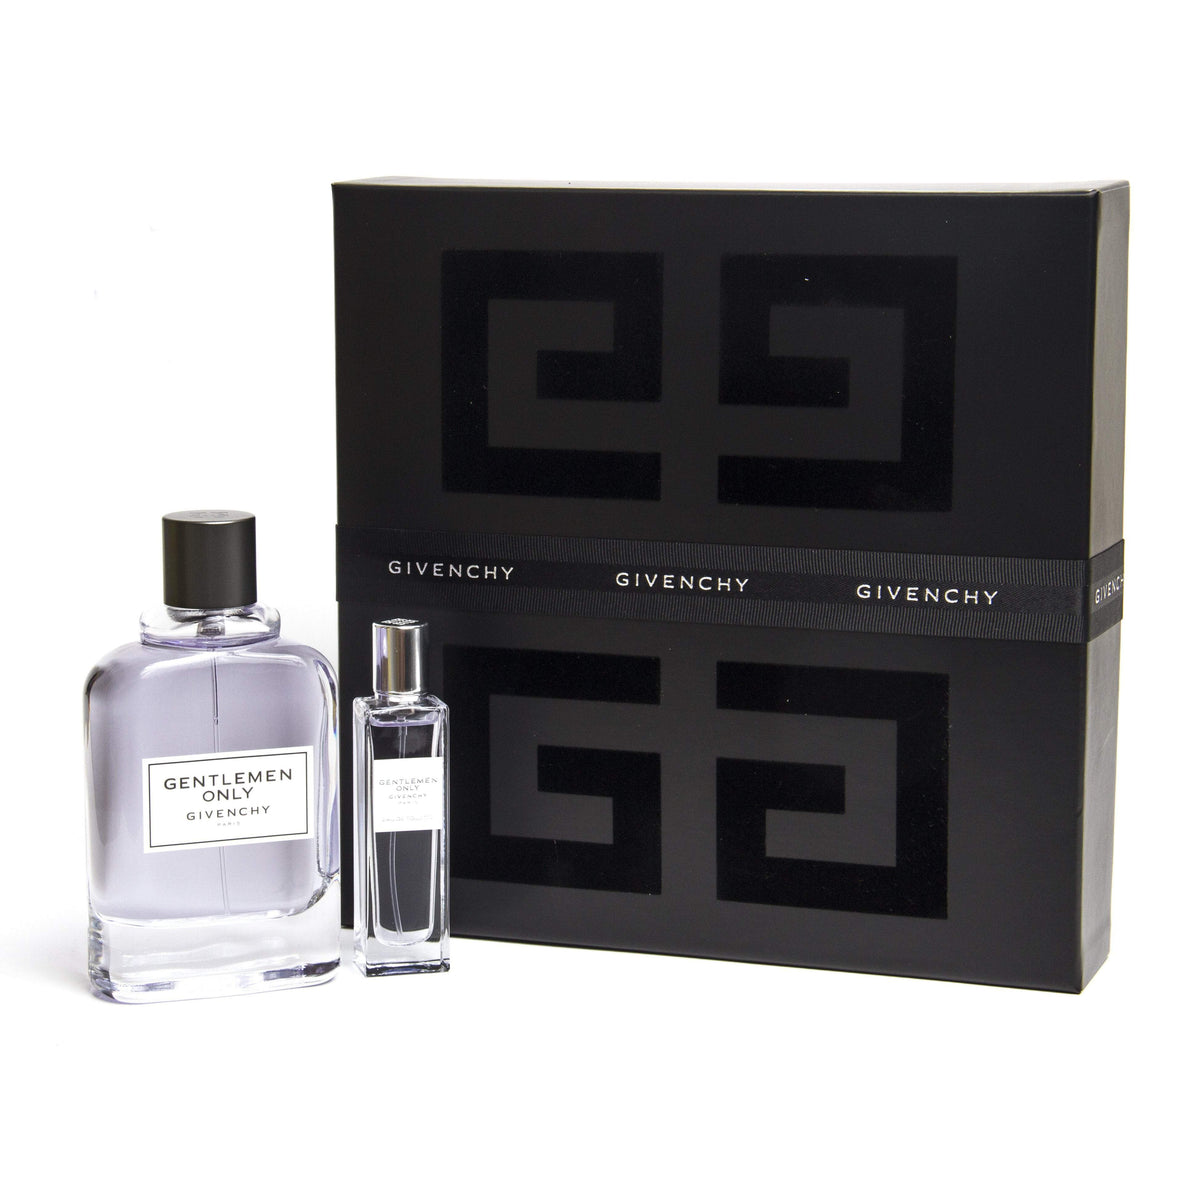 Gentlemen Only Gift Set for Men by Givenchy 3.3 oz.